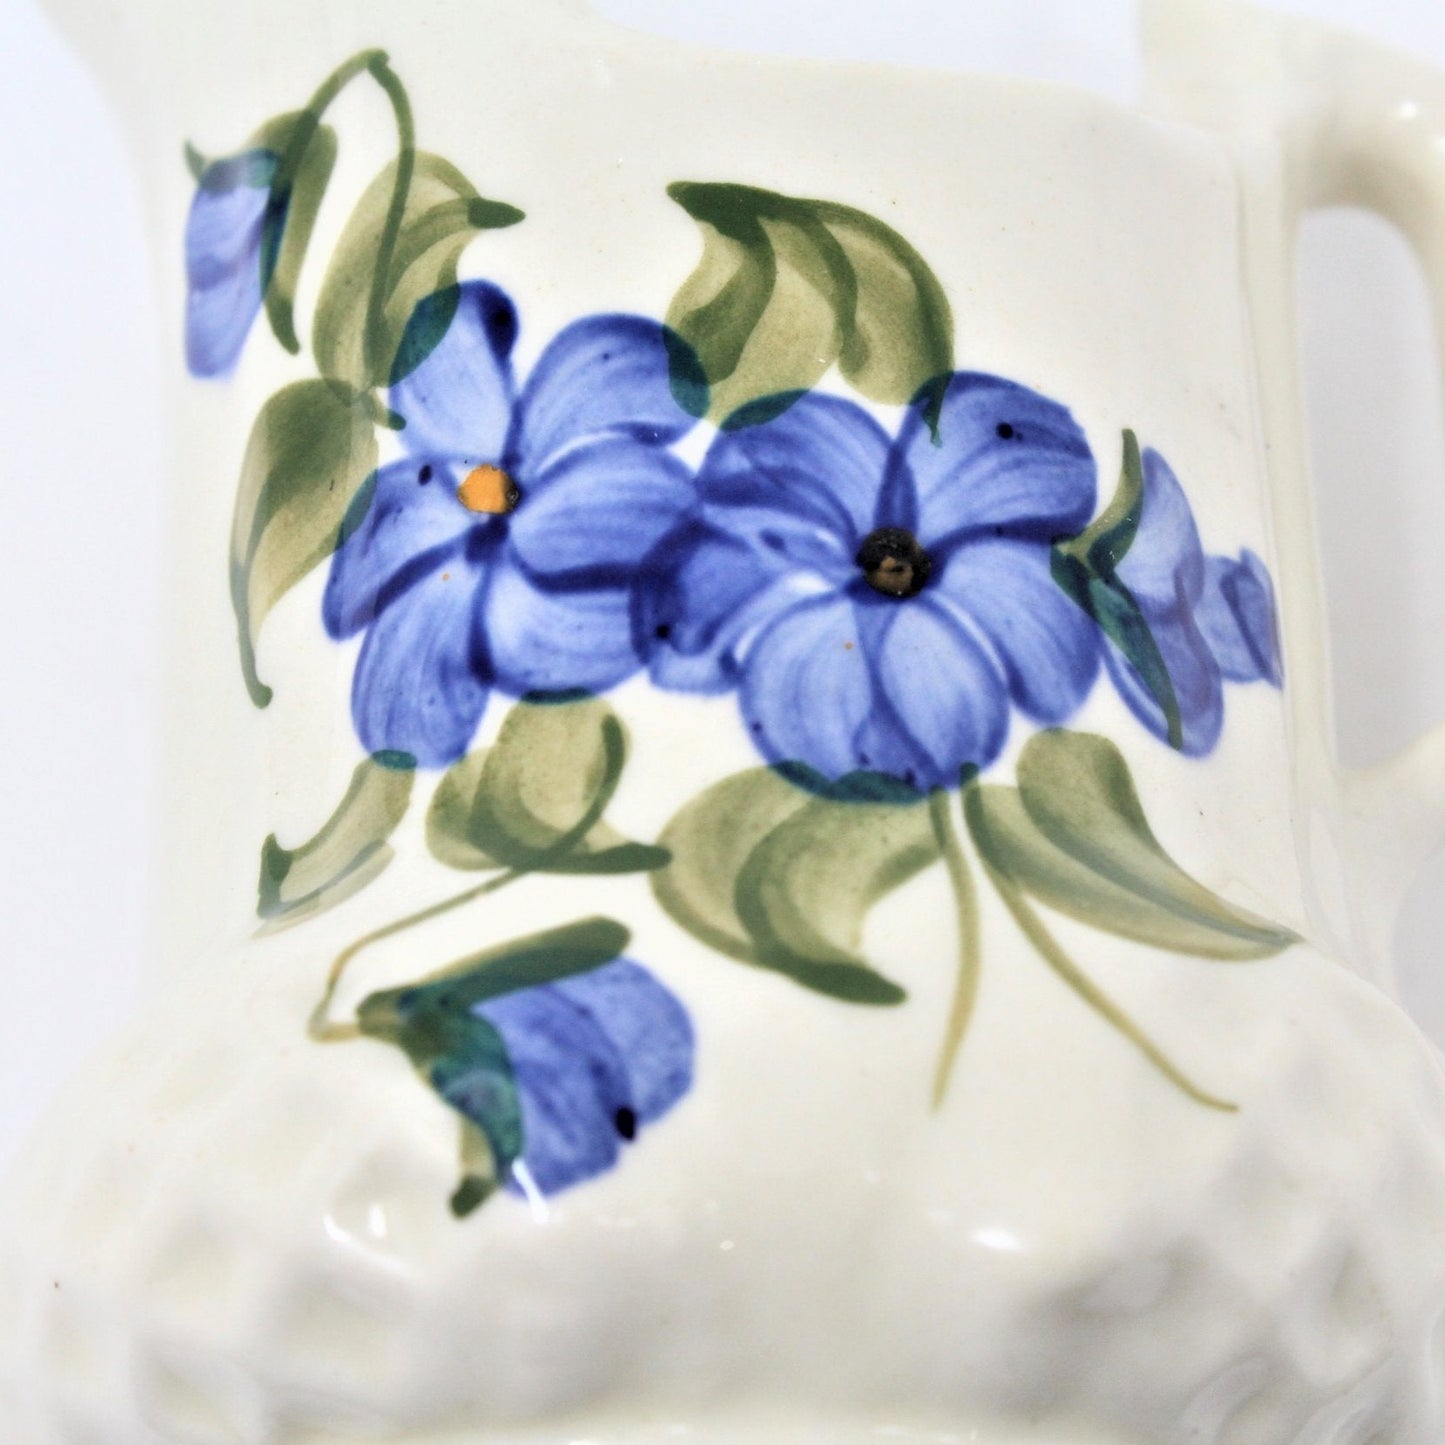 Creamer, Cash Family Pottery / Clinchfield Artware, Blue Flowers, Made in USA